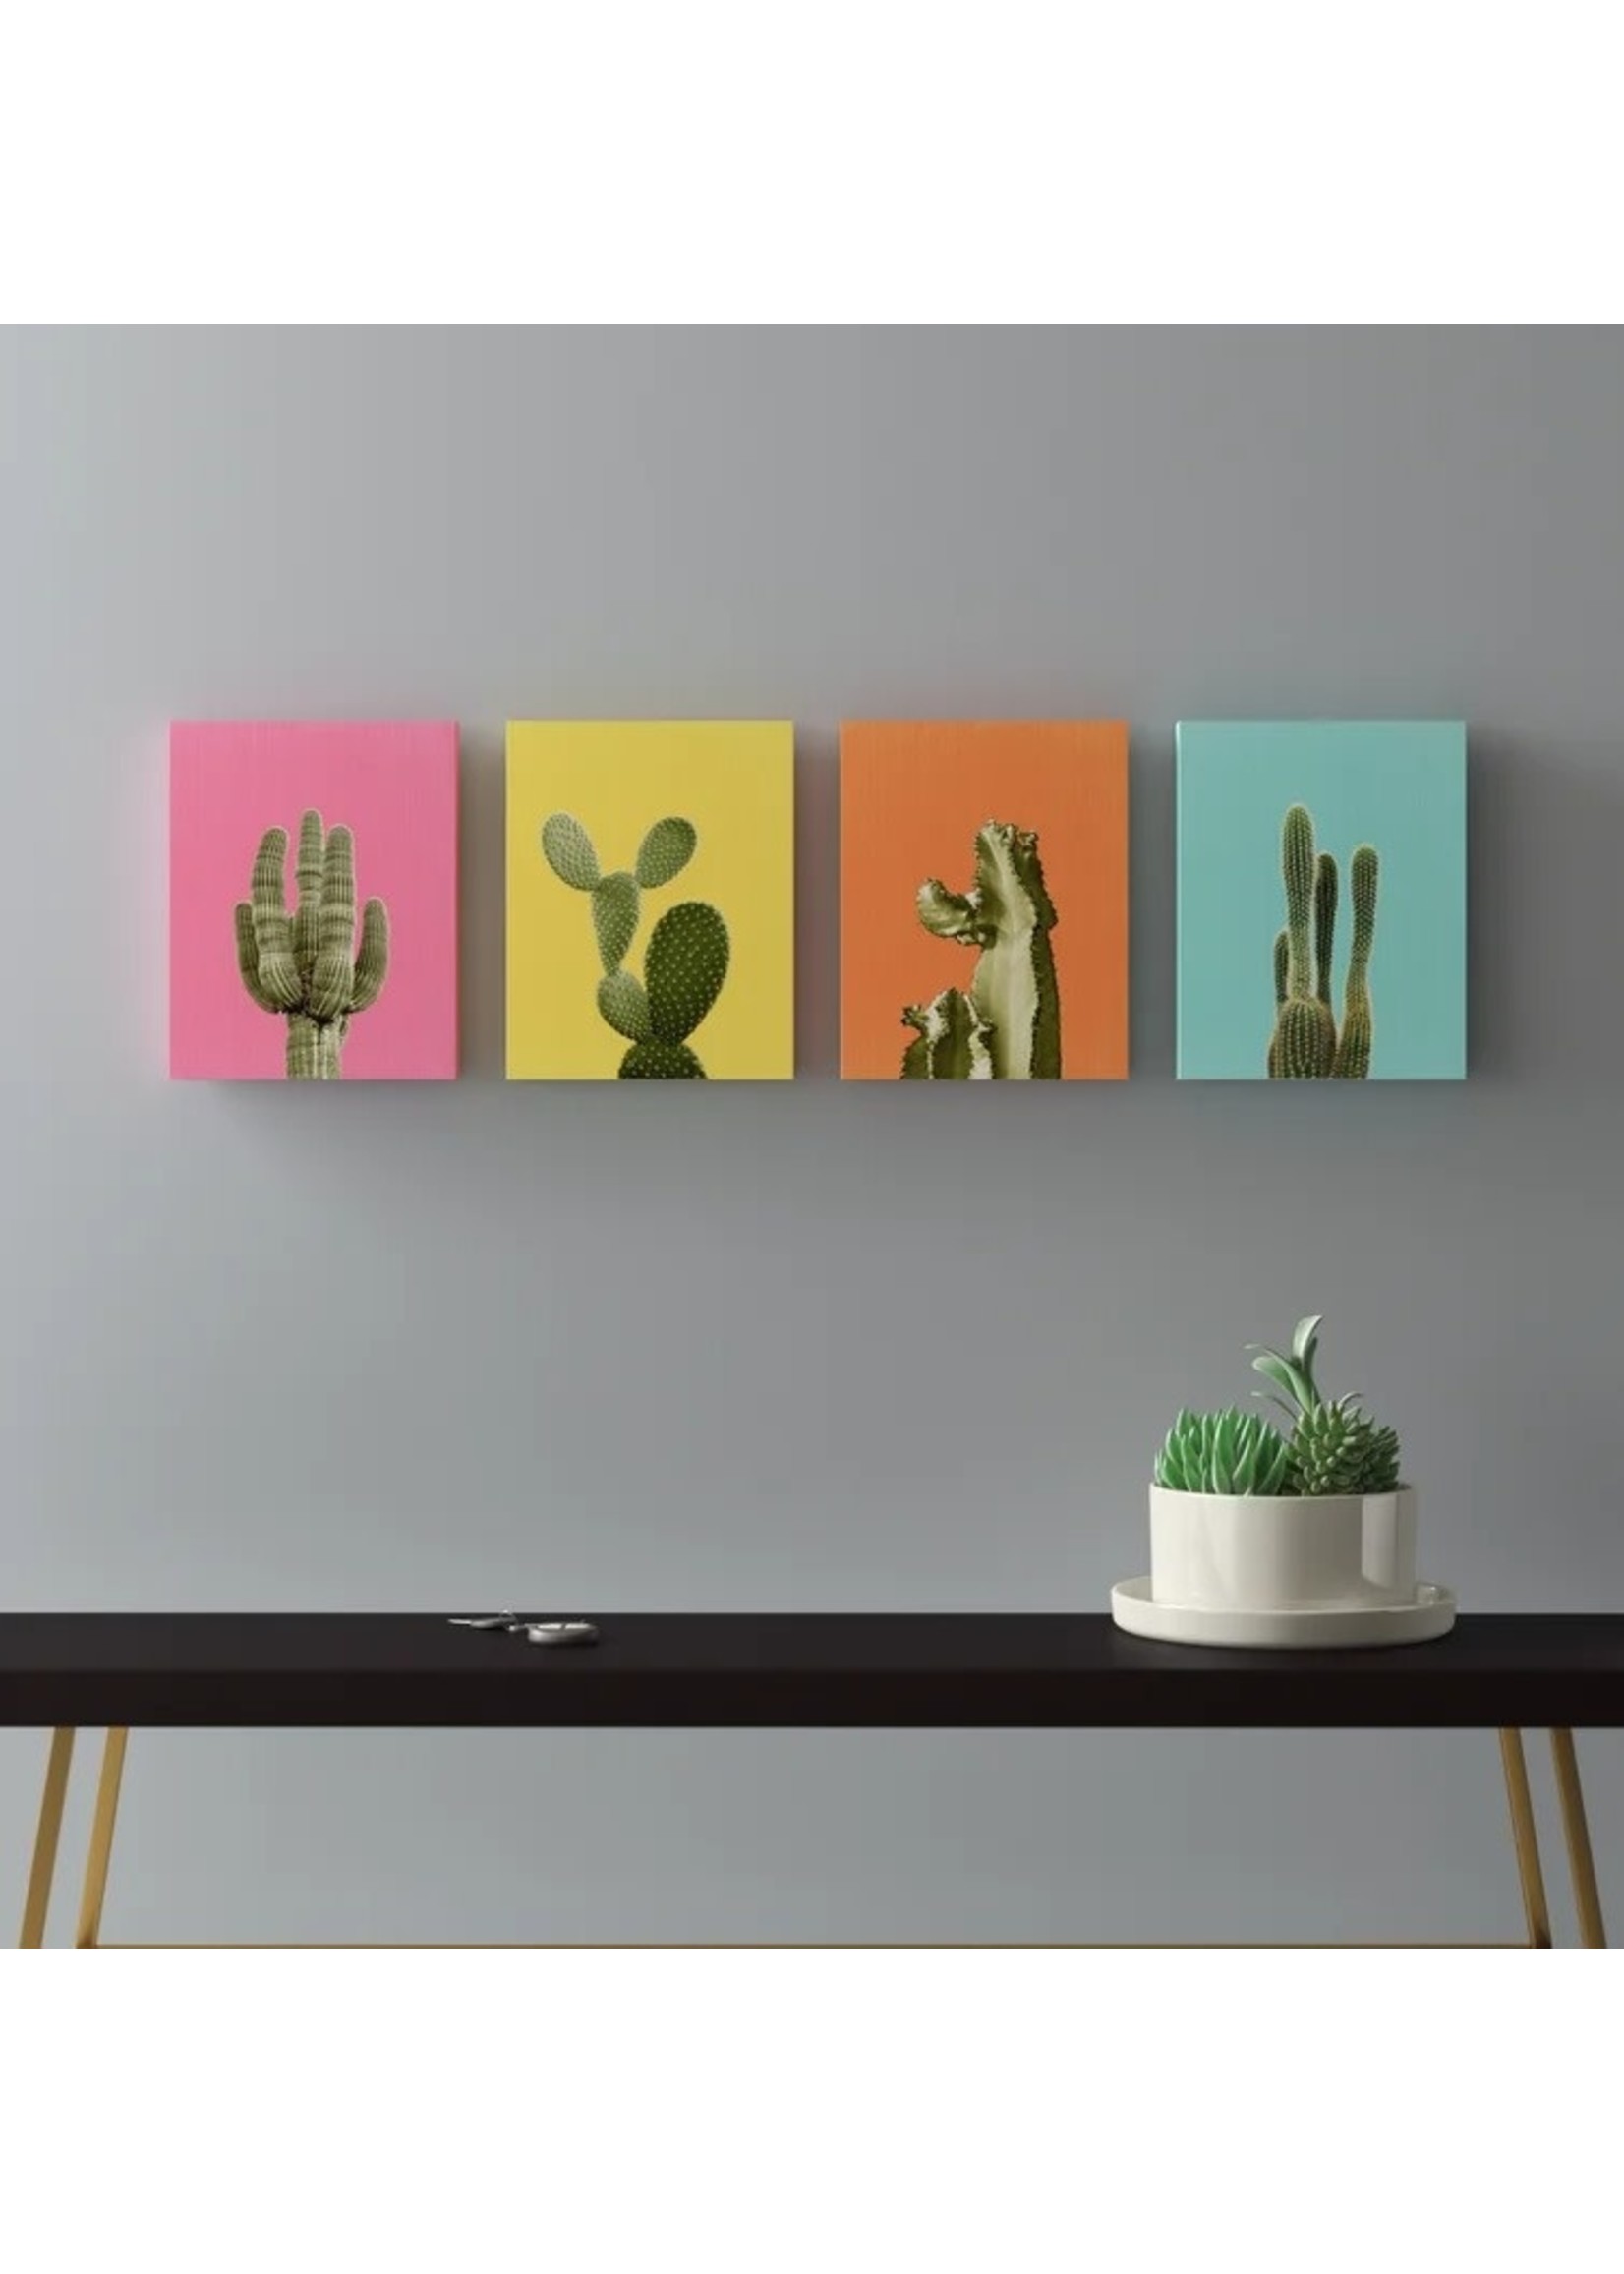 *Cactus by Lila + Lola - 4 Piece Wrapped Canvas Graphic Art Print Set